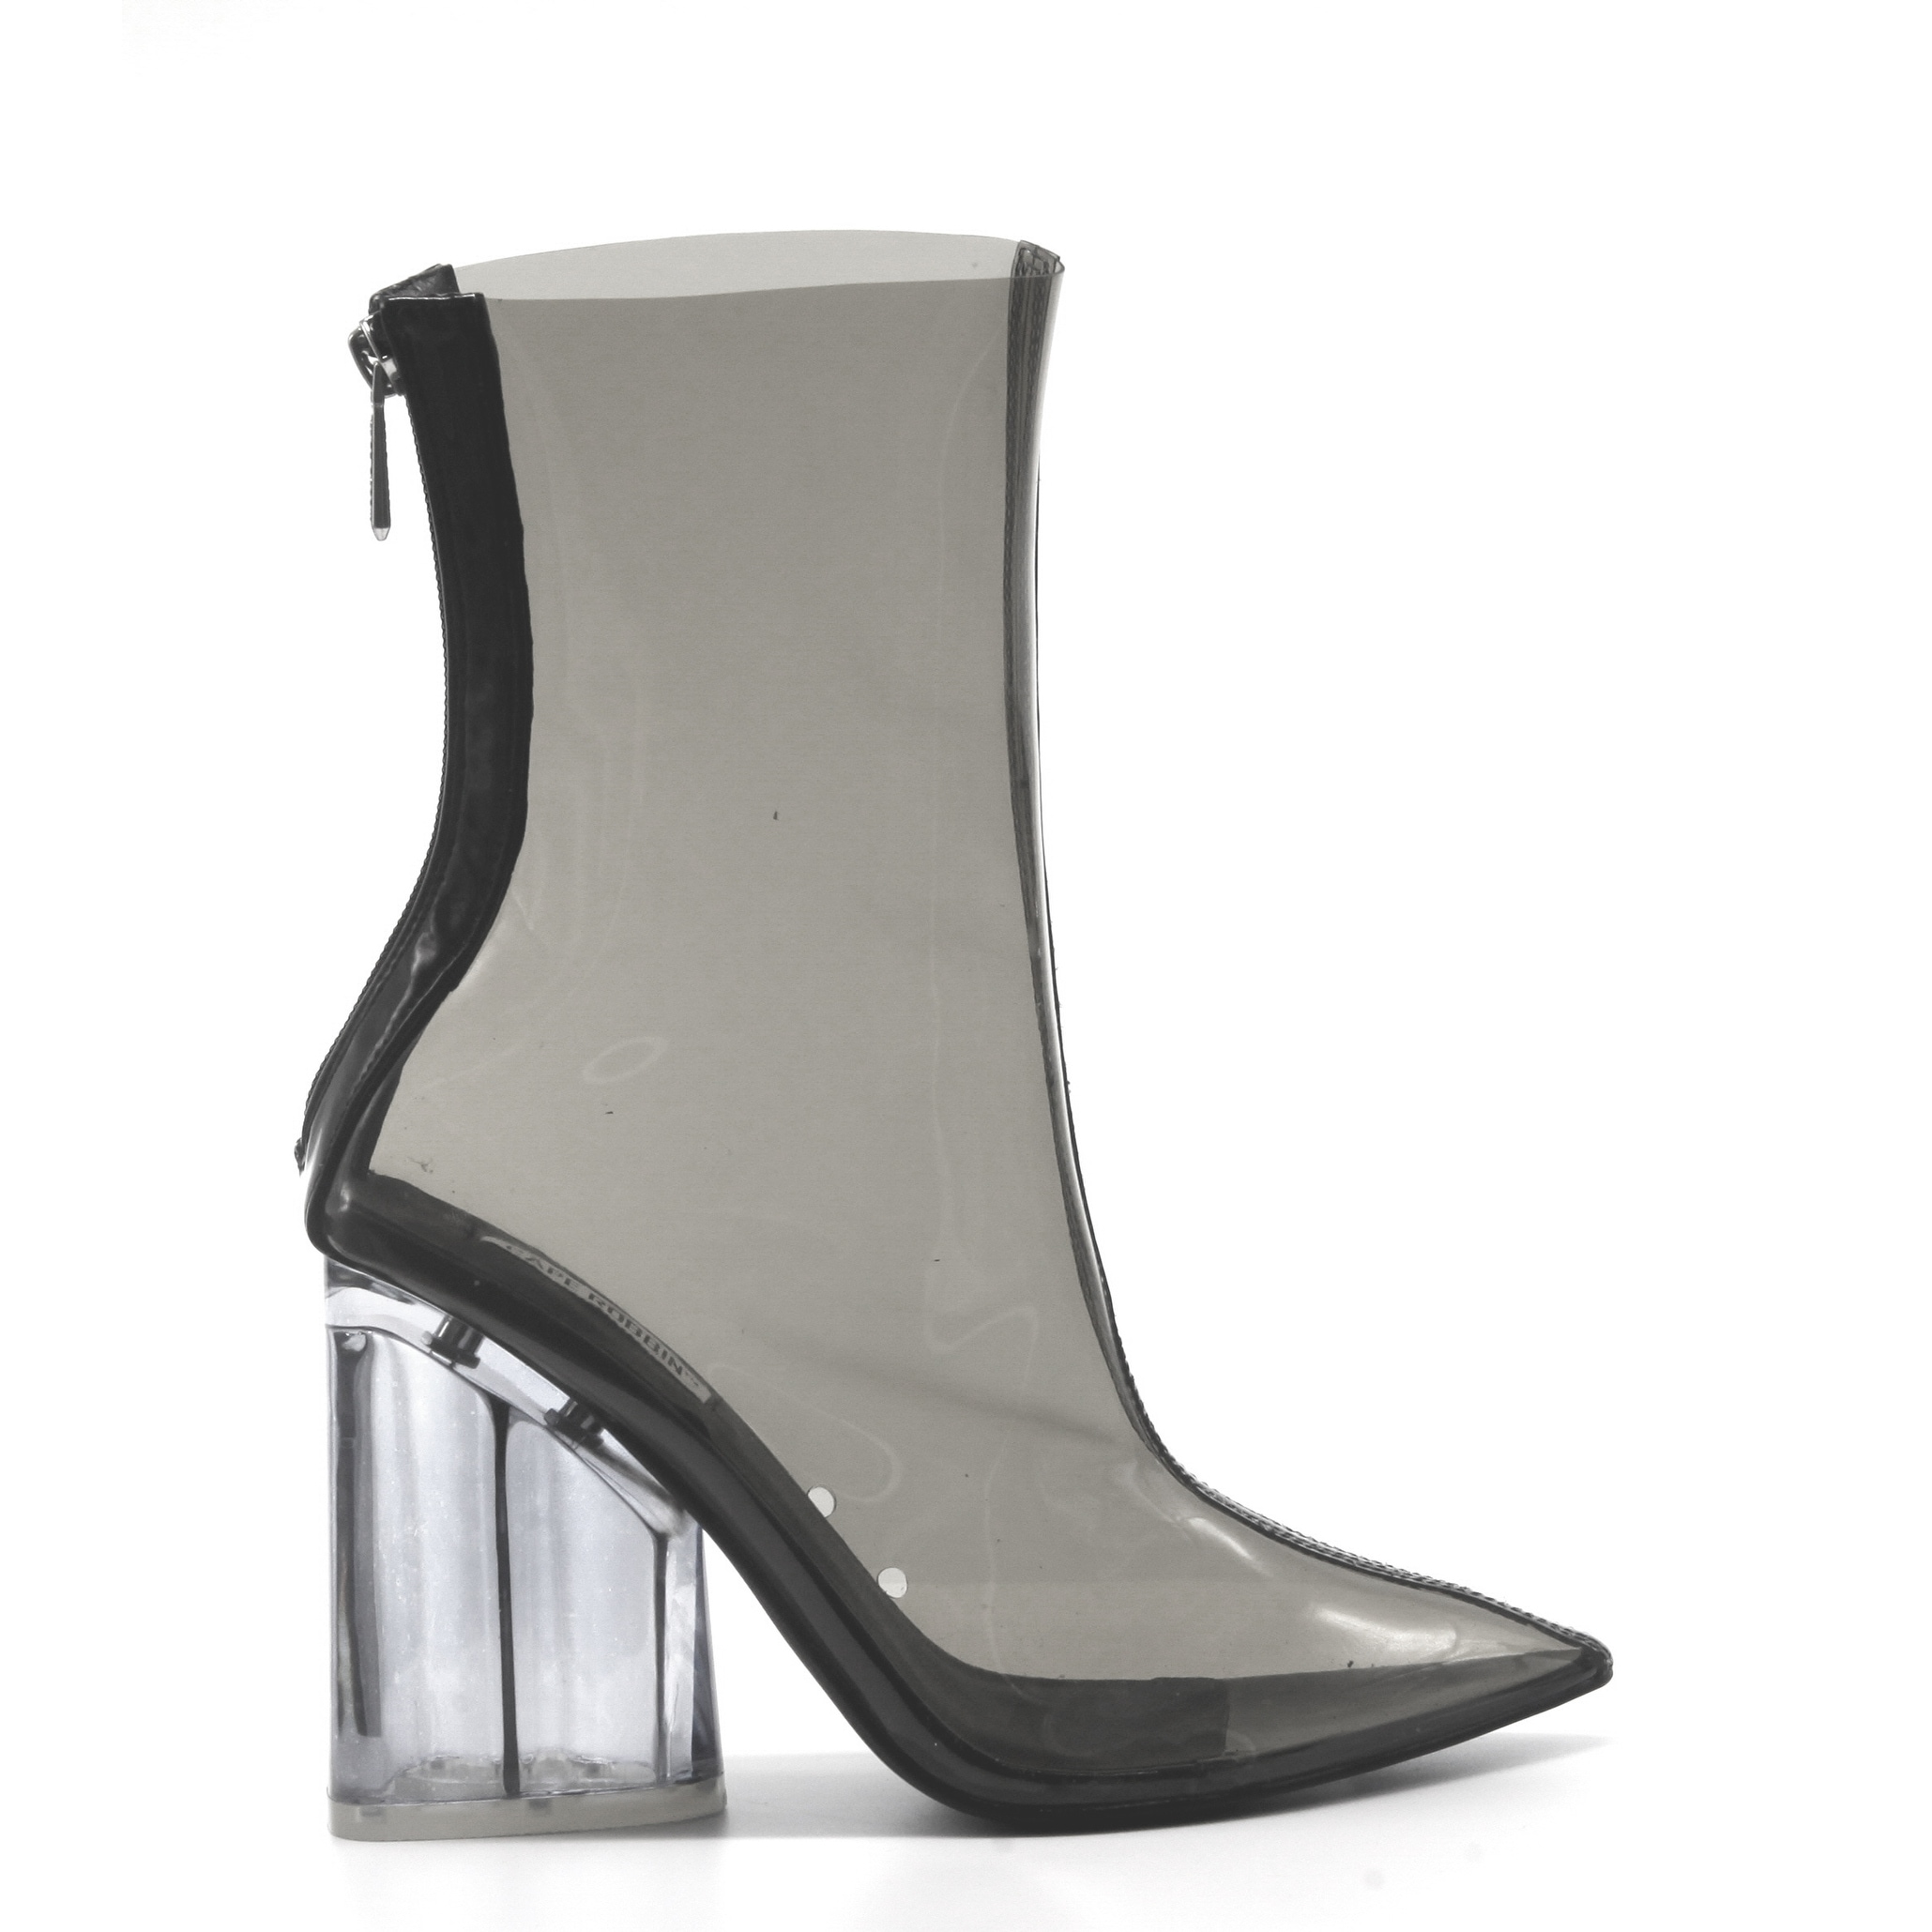 perspex heel ankle boots